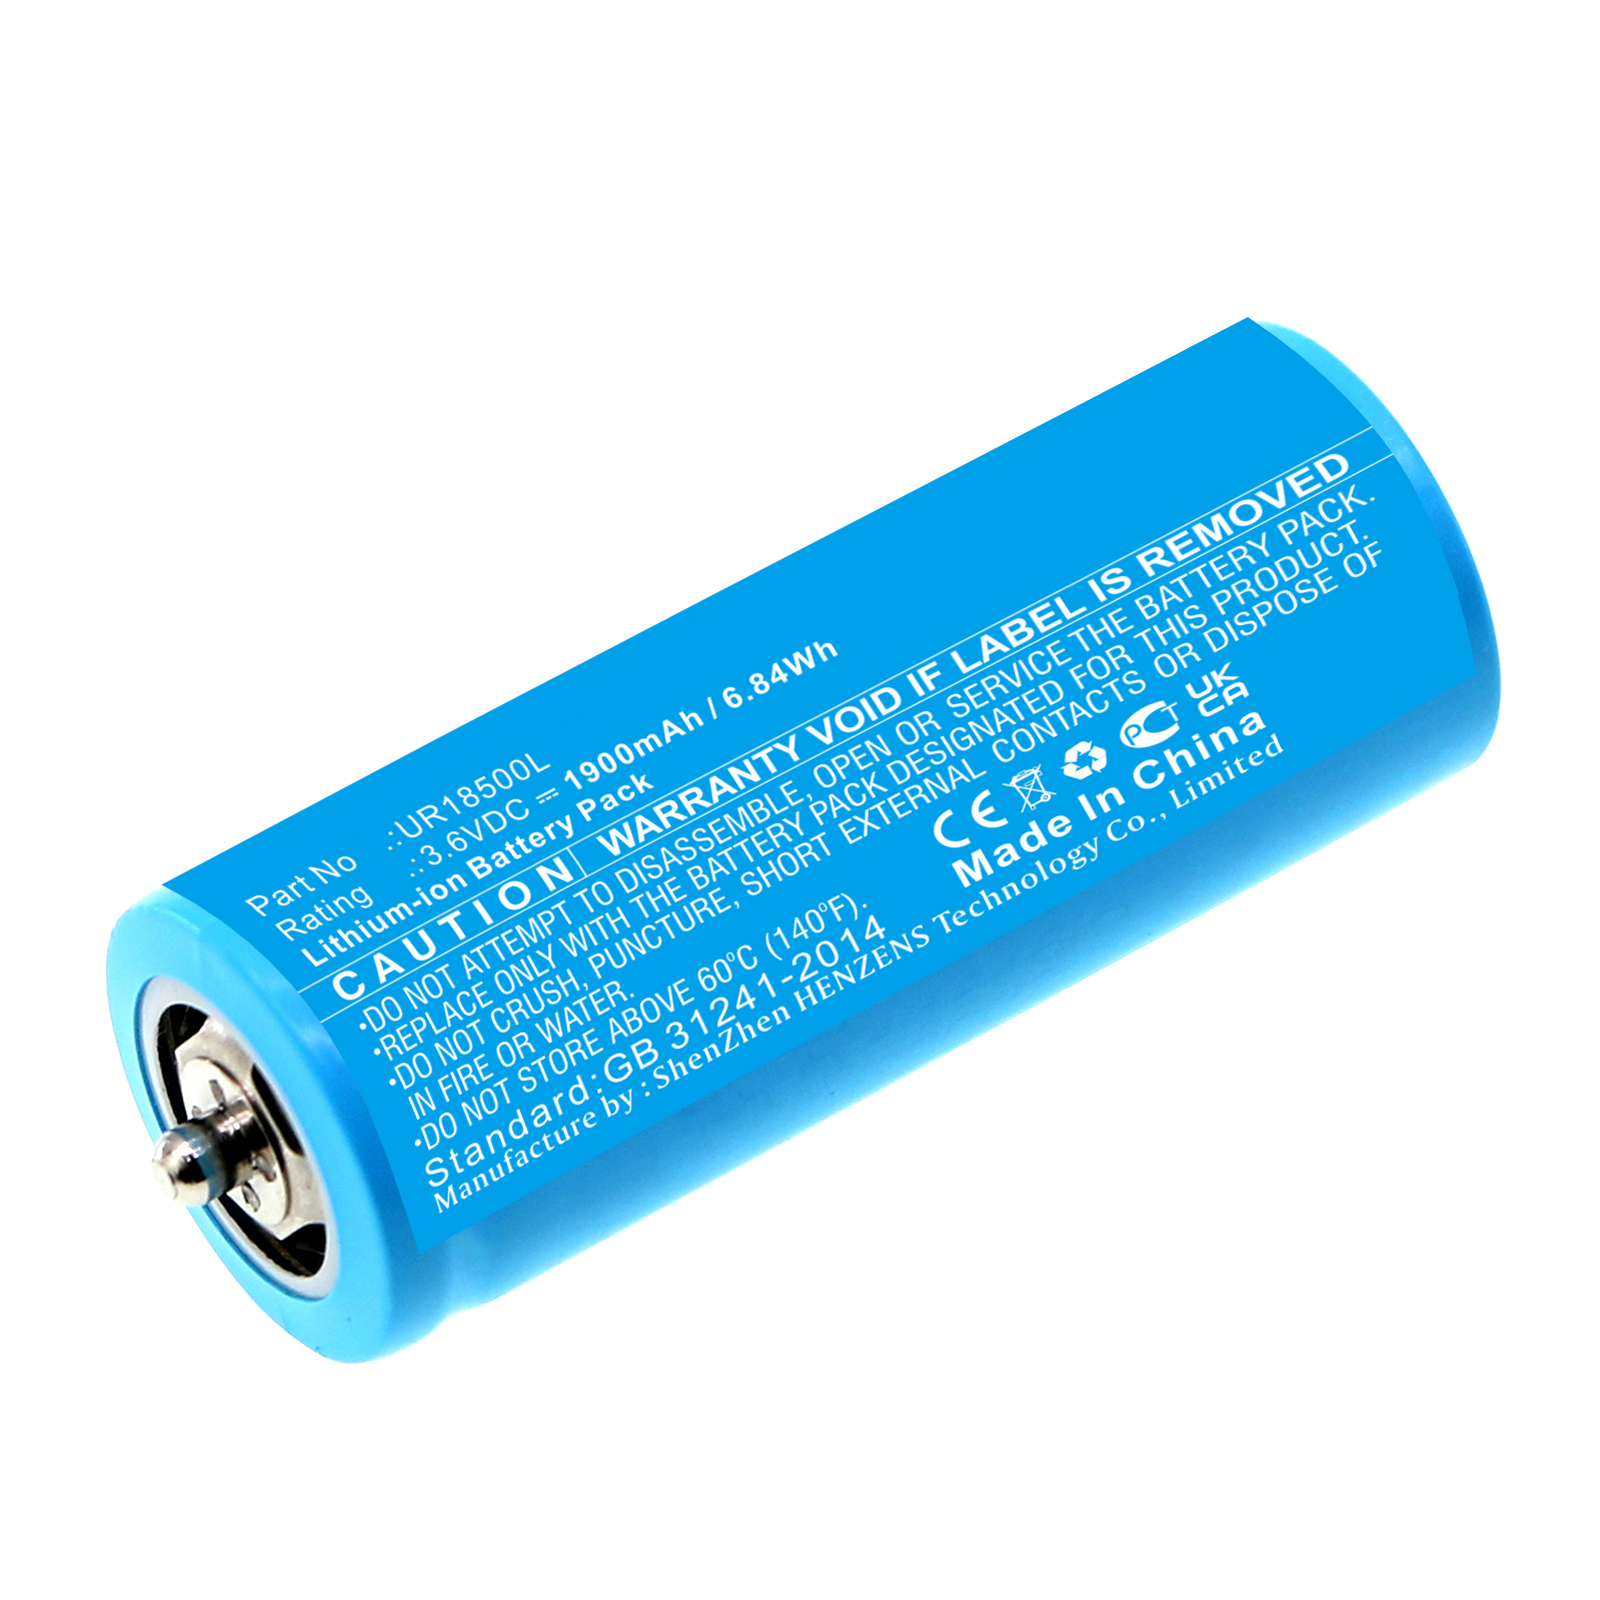 Synergy Digital Shaver Battery, Compatible with Braun 3018765 Shaver Battery (Li-ion, 3.6V, 1900mAh)